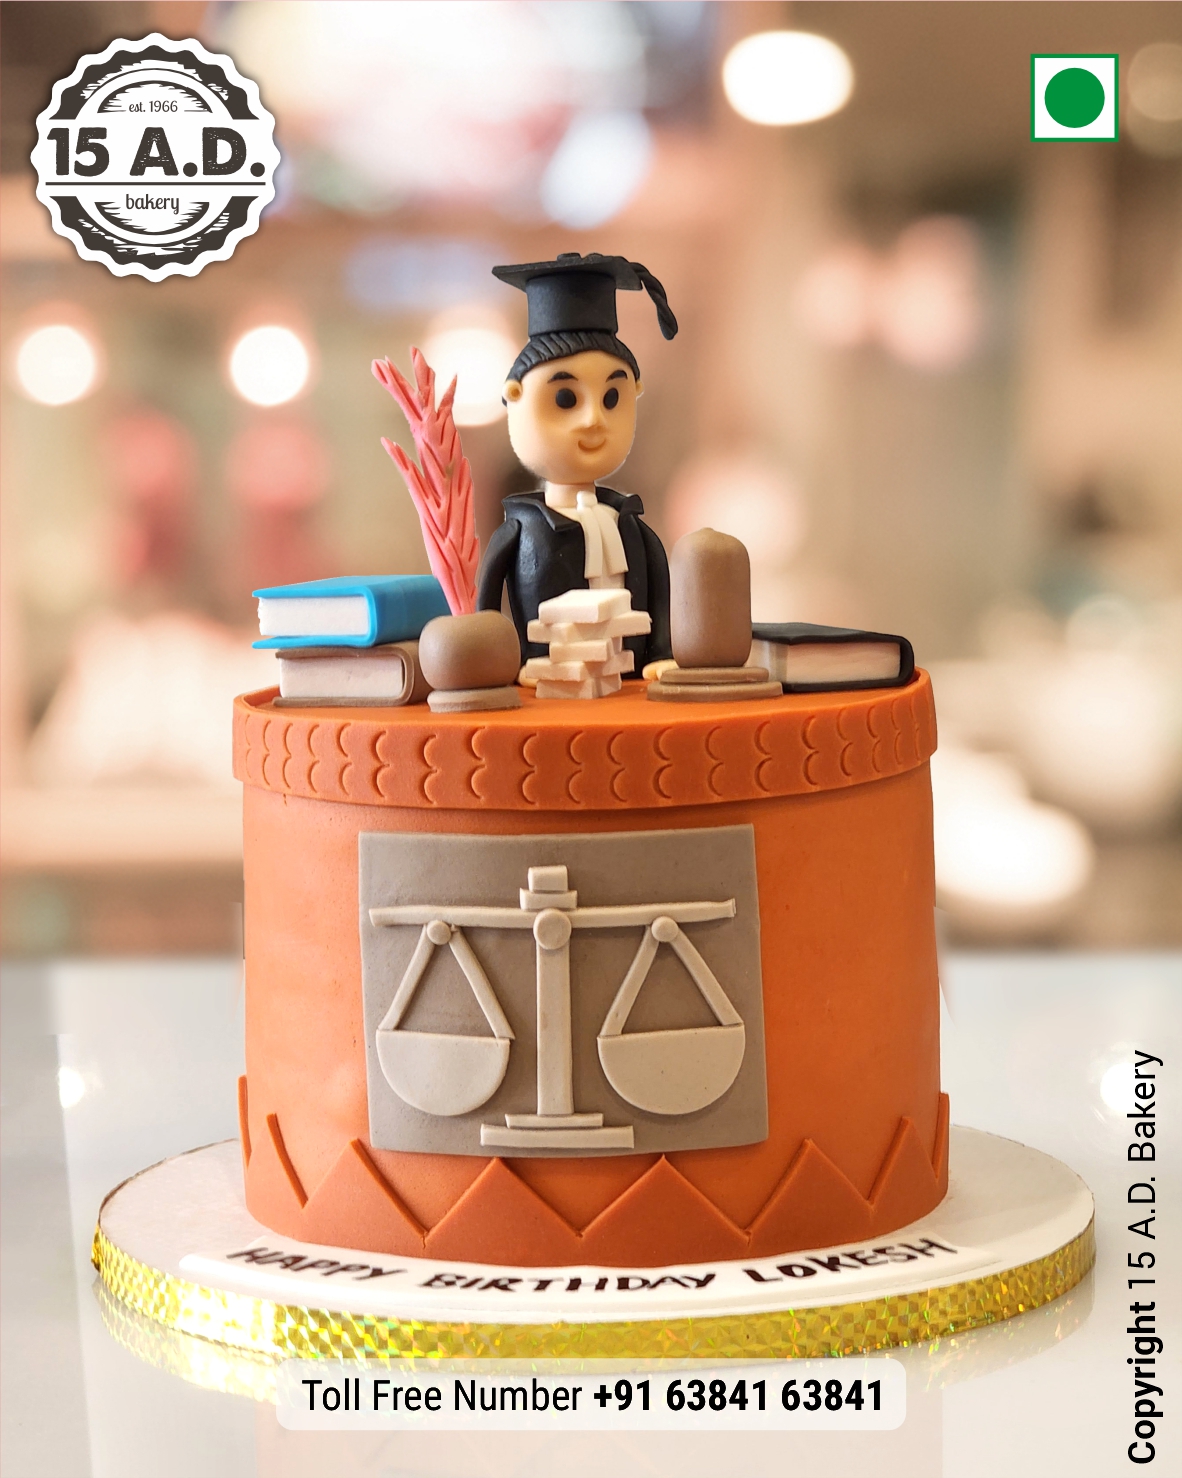 Cake for Him by 15 AD Bakery